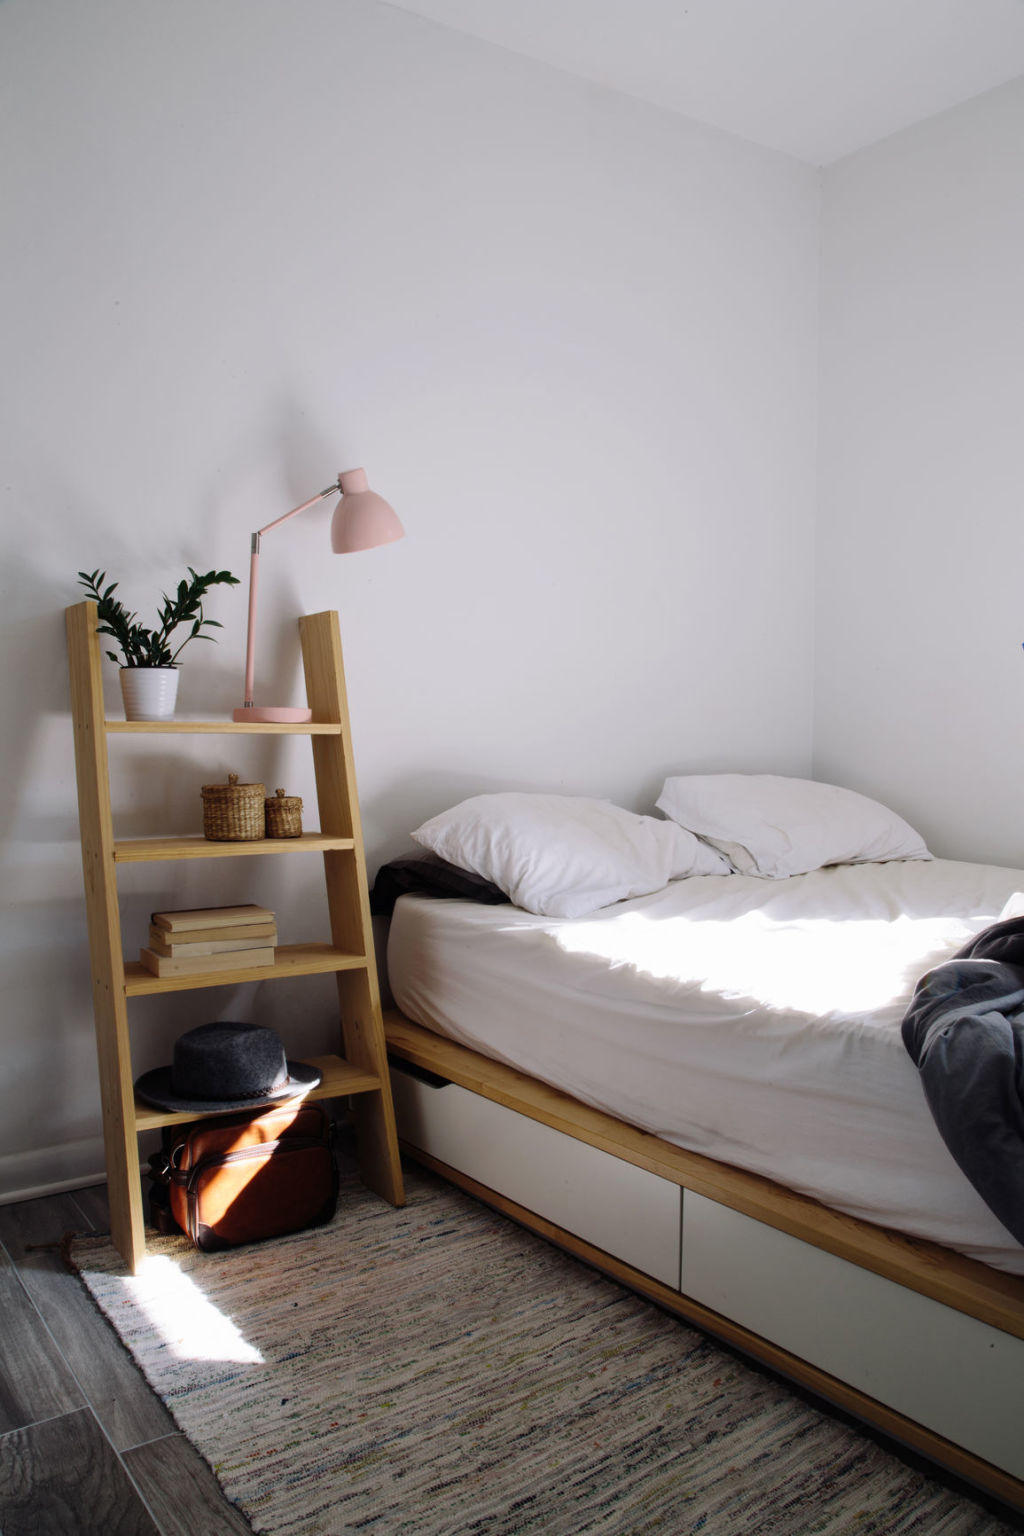 A minimal bed and ladder nightstand